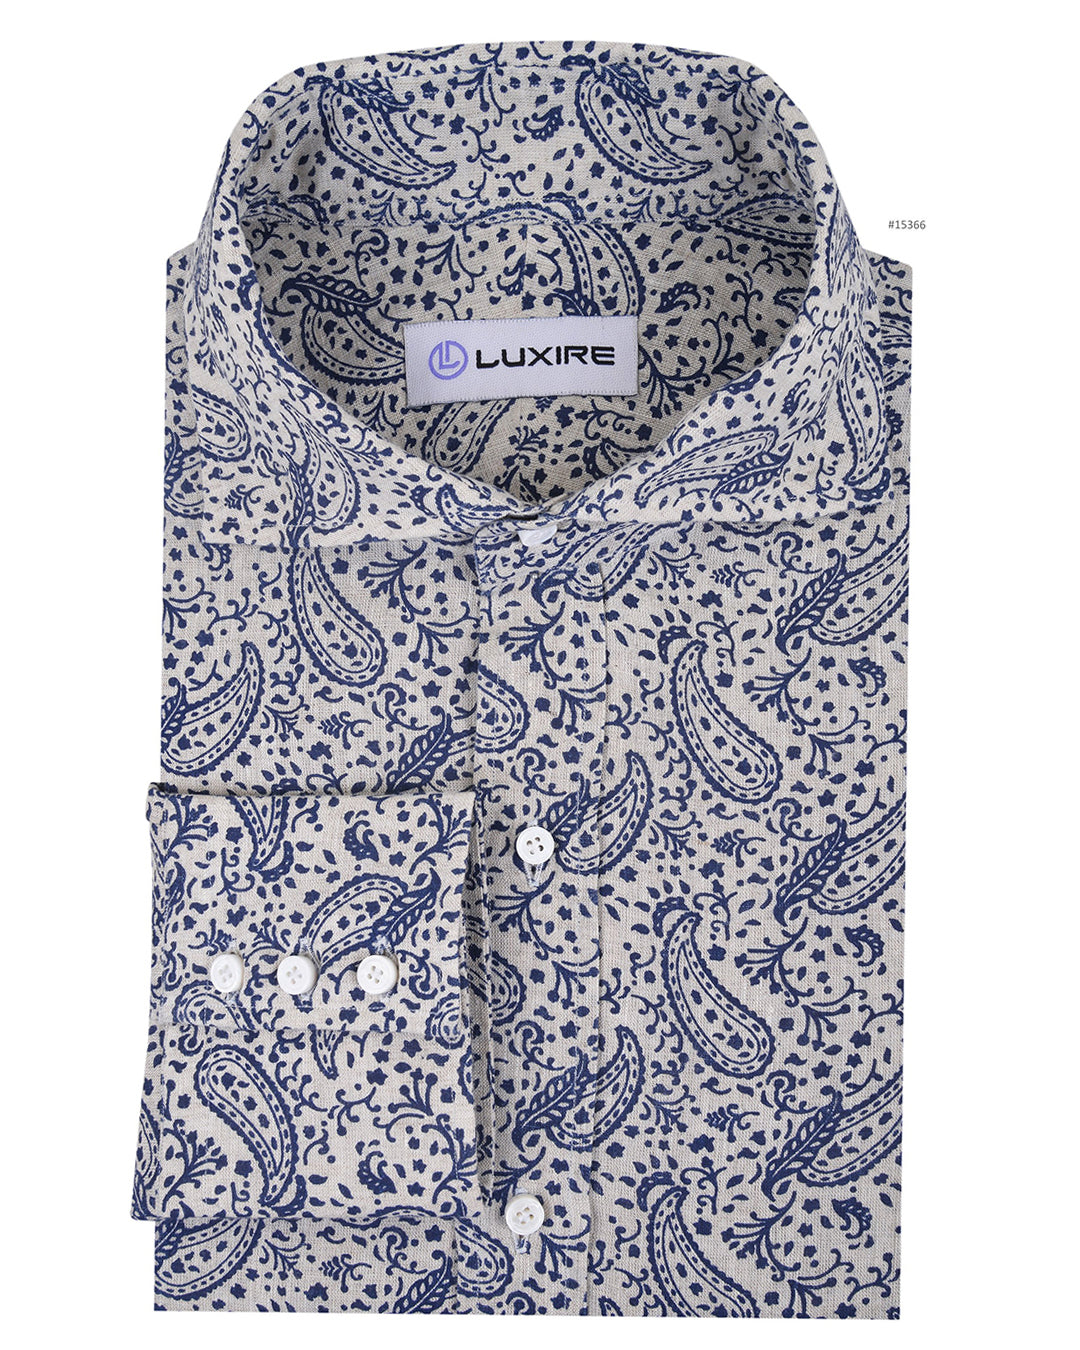 Front view of custom linen shirt for men in navy printed paisley